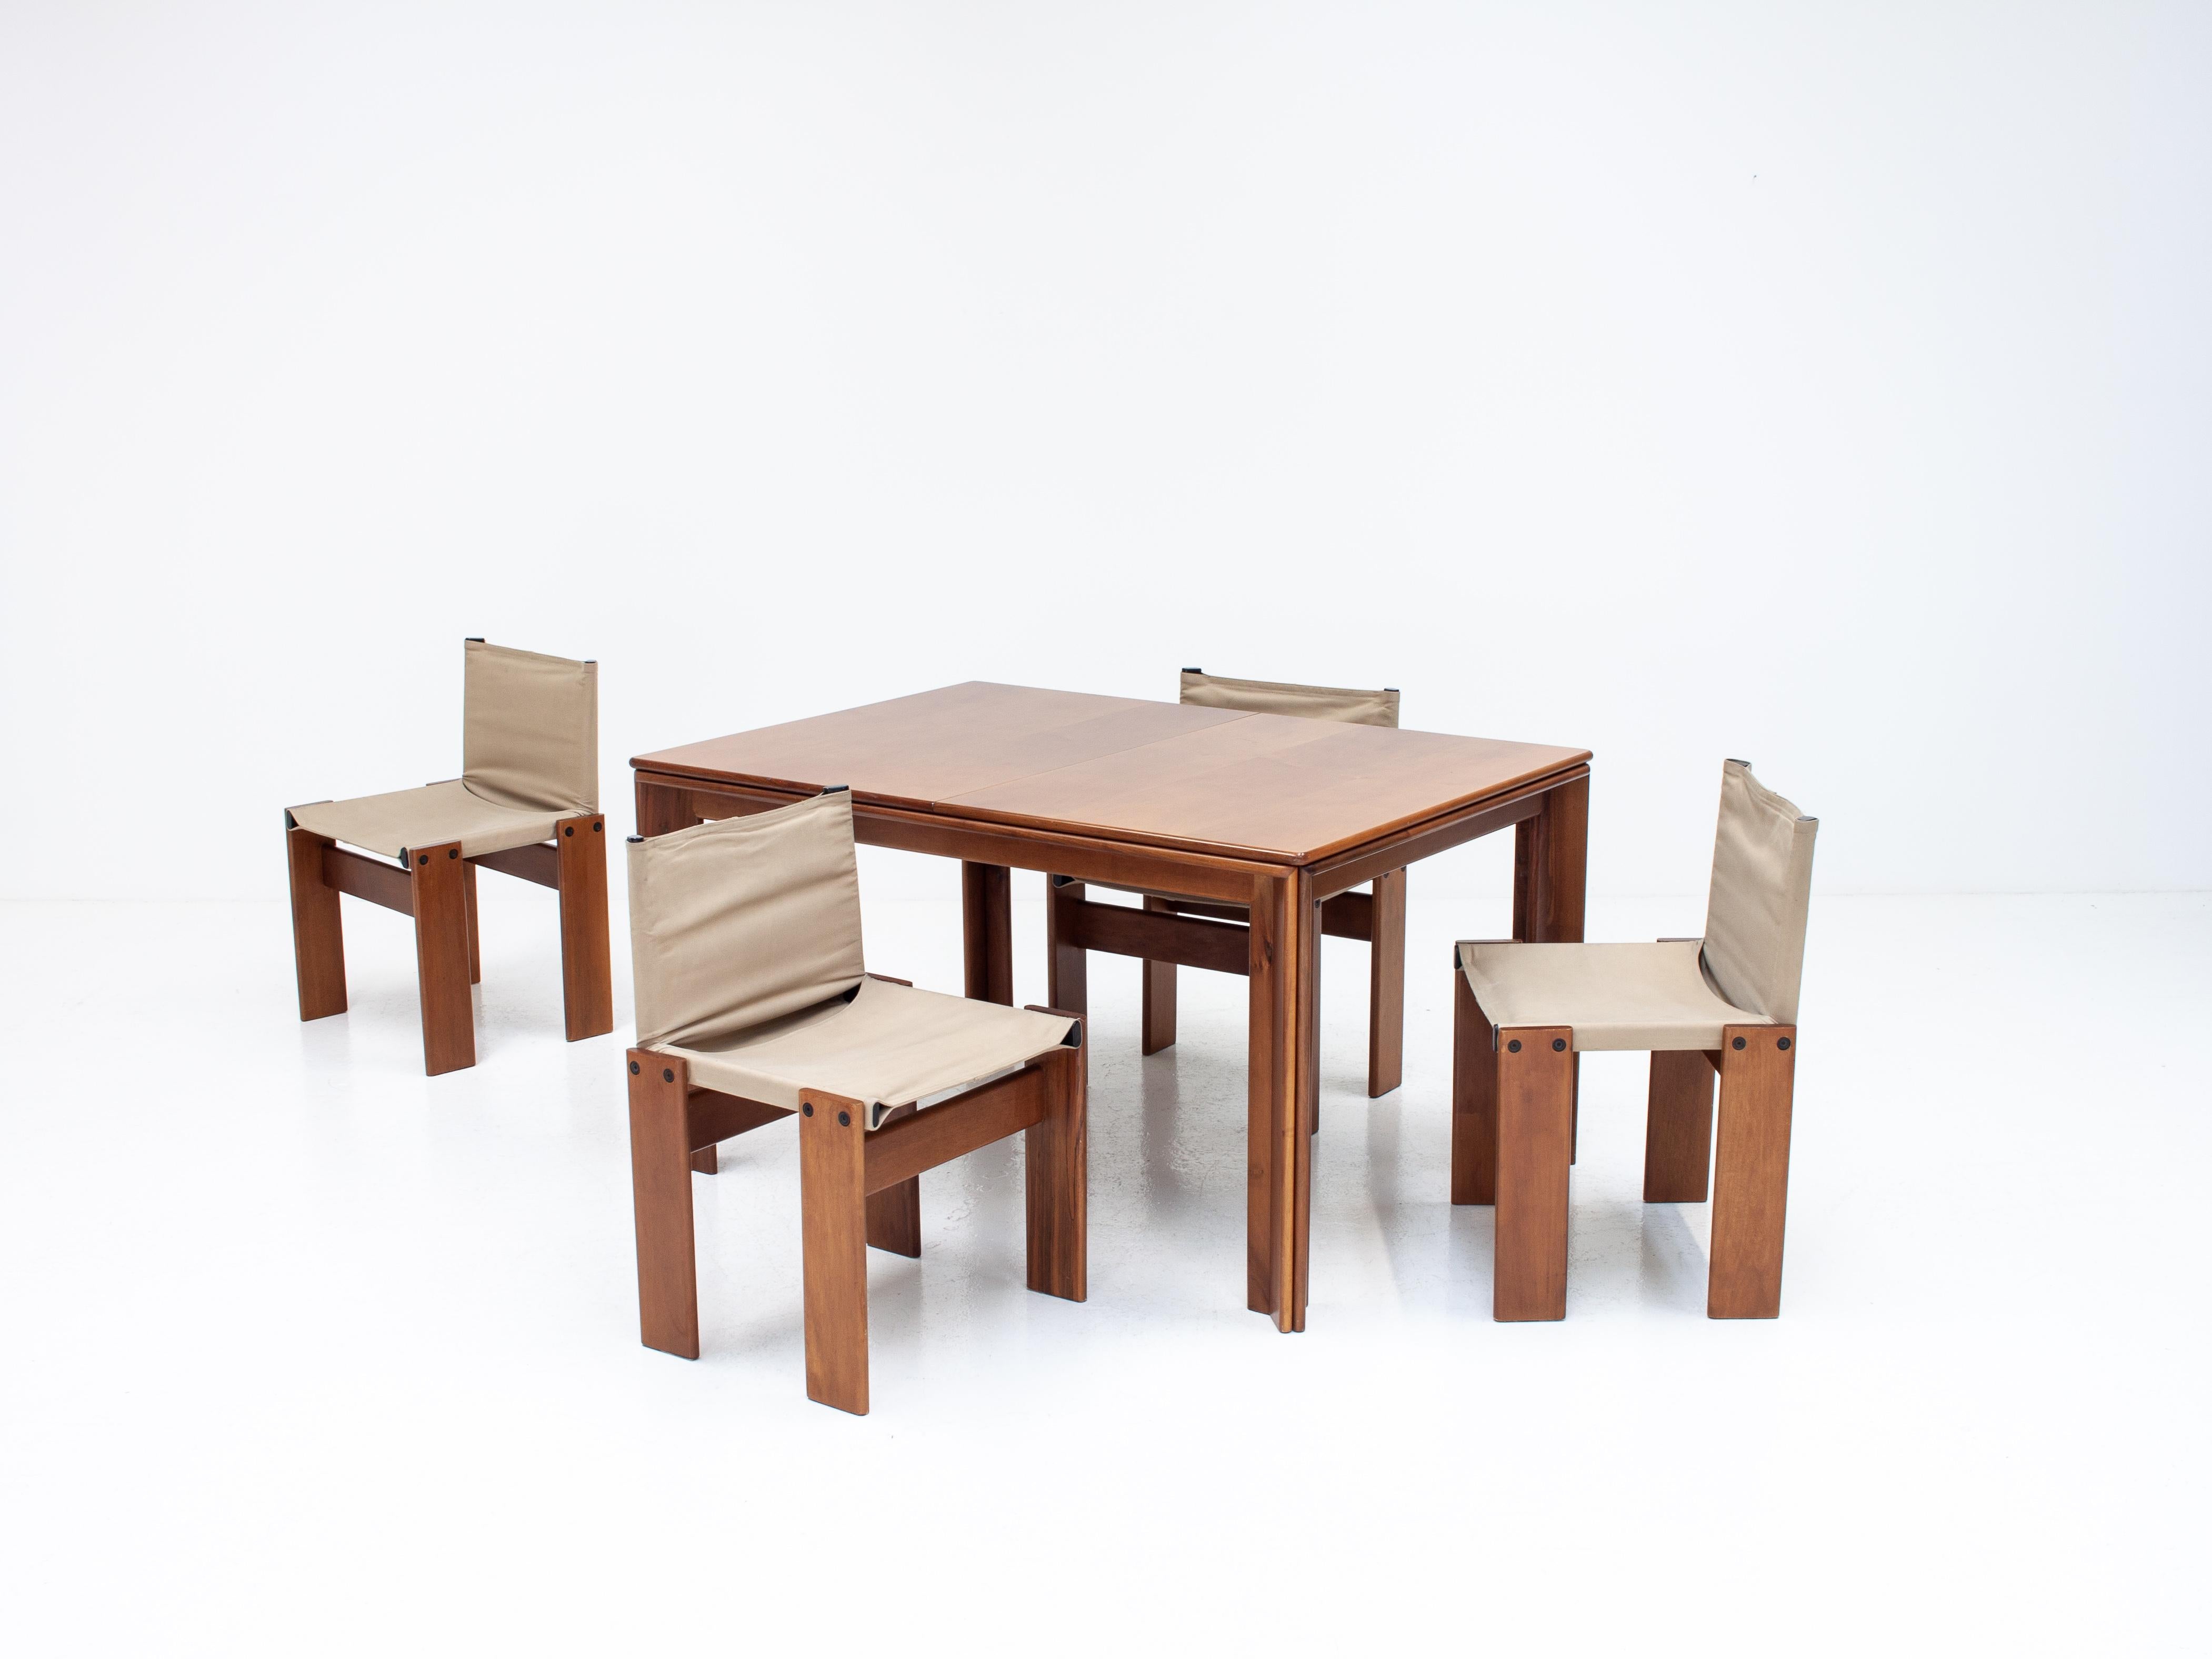 A set of 'Monk' dining chairs & table by Italian award-winning designer couple Afra & Tobia Scarpa. 

With Walnut wood and canvas, the design is high-quality, minimal and solid. Manufactured by Molteni, Italy, 1974. 

A stunning set and rare to be